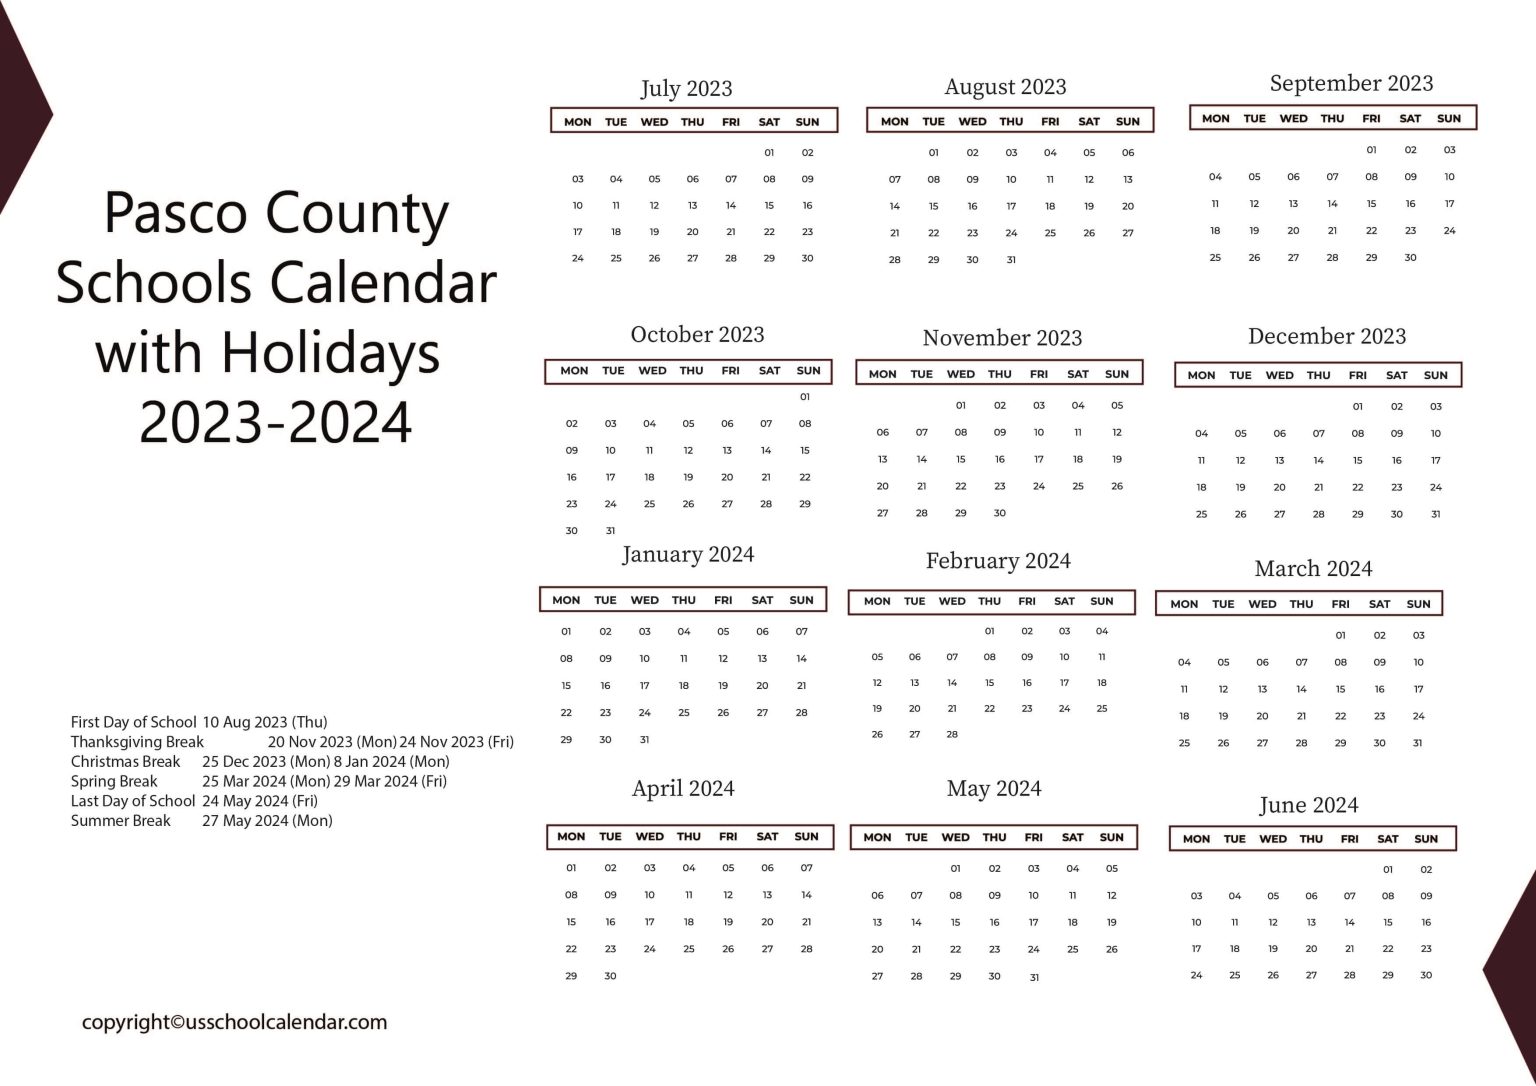 Pasco County Schools Calendar with Holidays 2023 2024